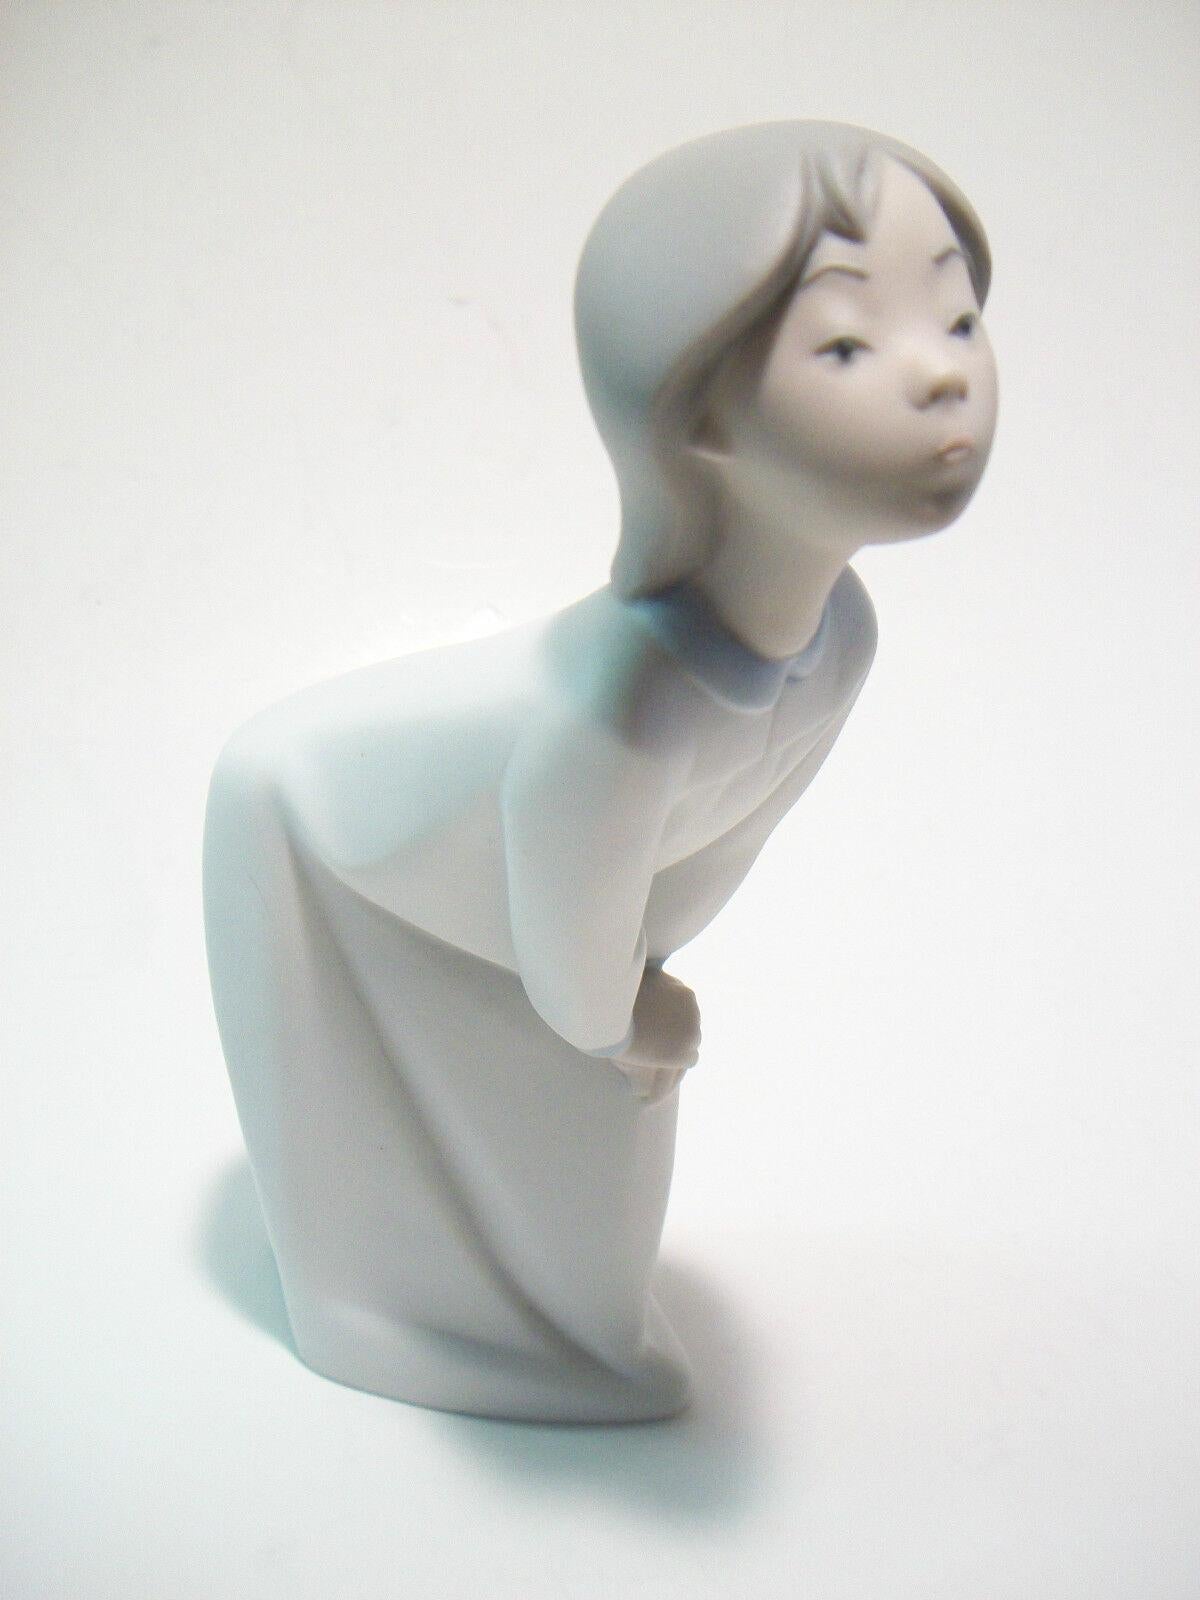 LLADRO - Vintage matte finish ceramic figure - bending girl dressed in her nightgown - retired - factory stamp to the base - Spain - mid 20th century.

Excellent vintage condition - no loss - no damage - no restoration - minor scuffs to the base